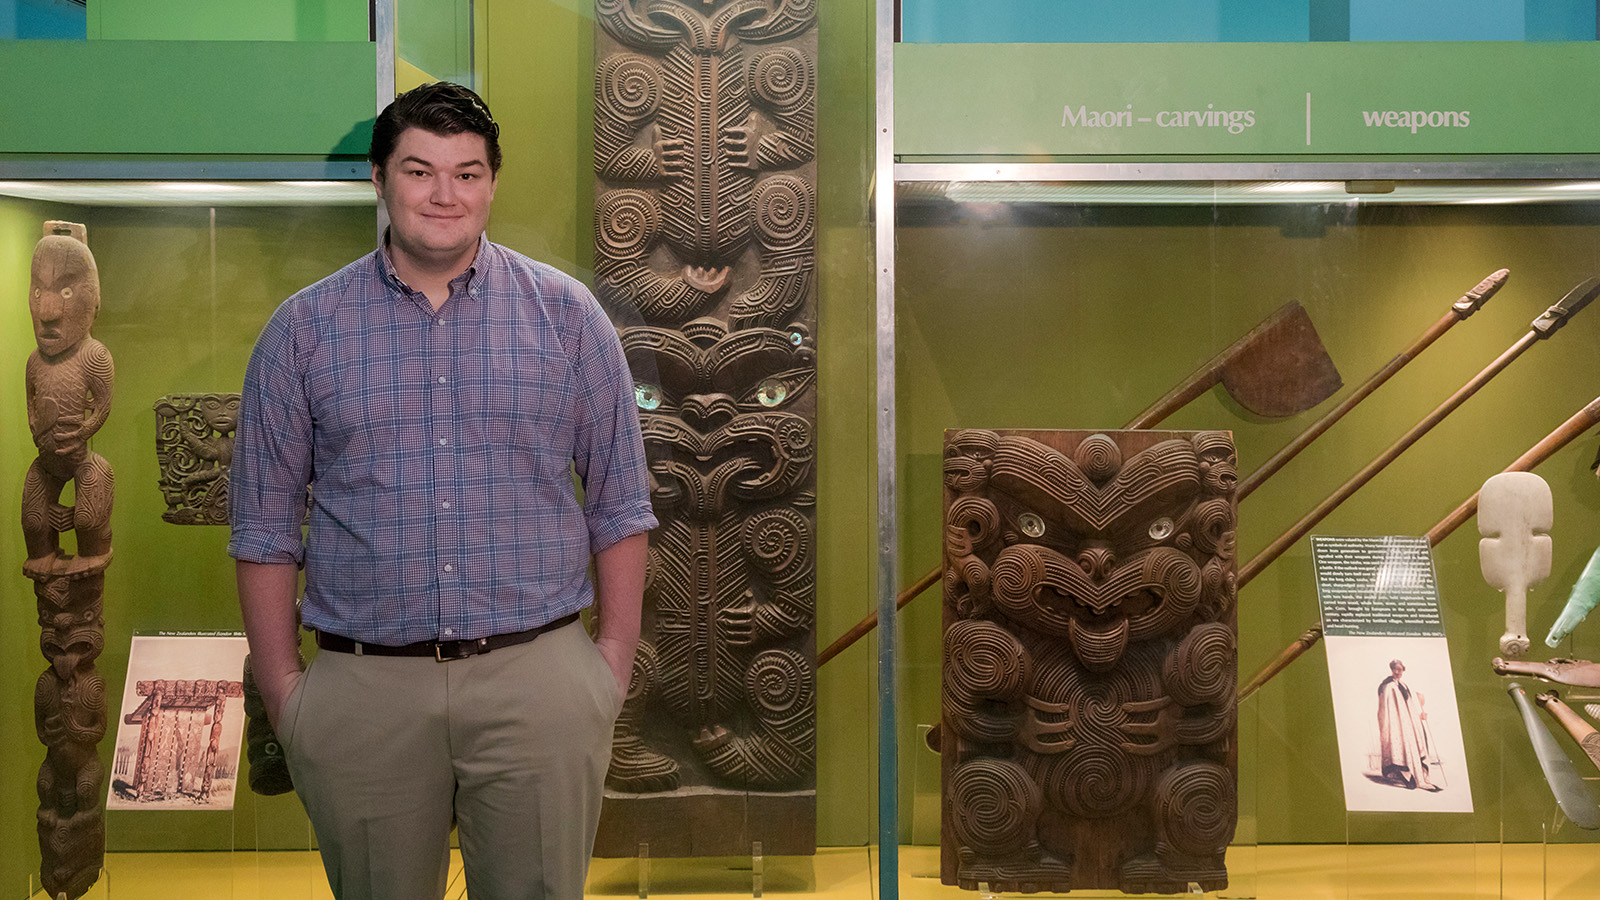 Colin Gravelle stands in front of a case of Maori artifacts.